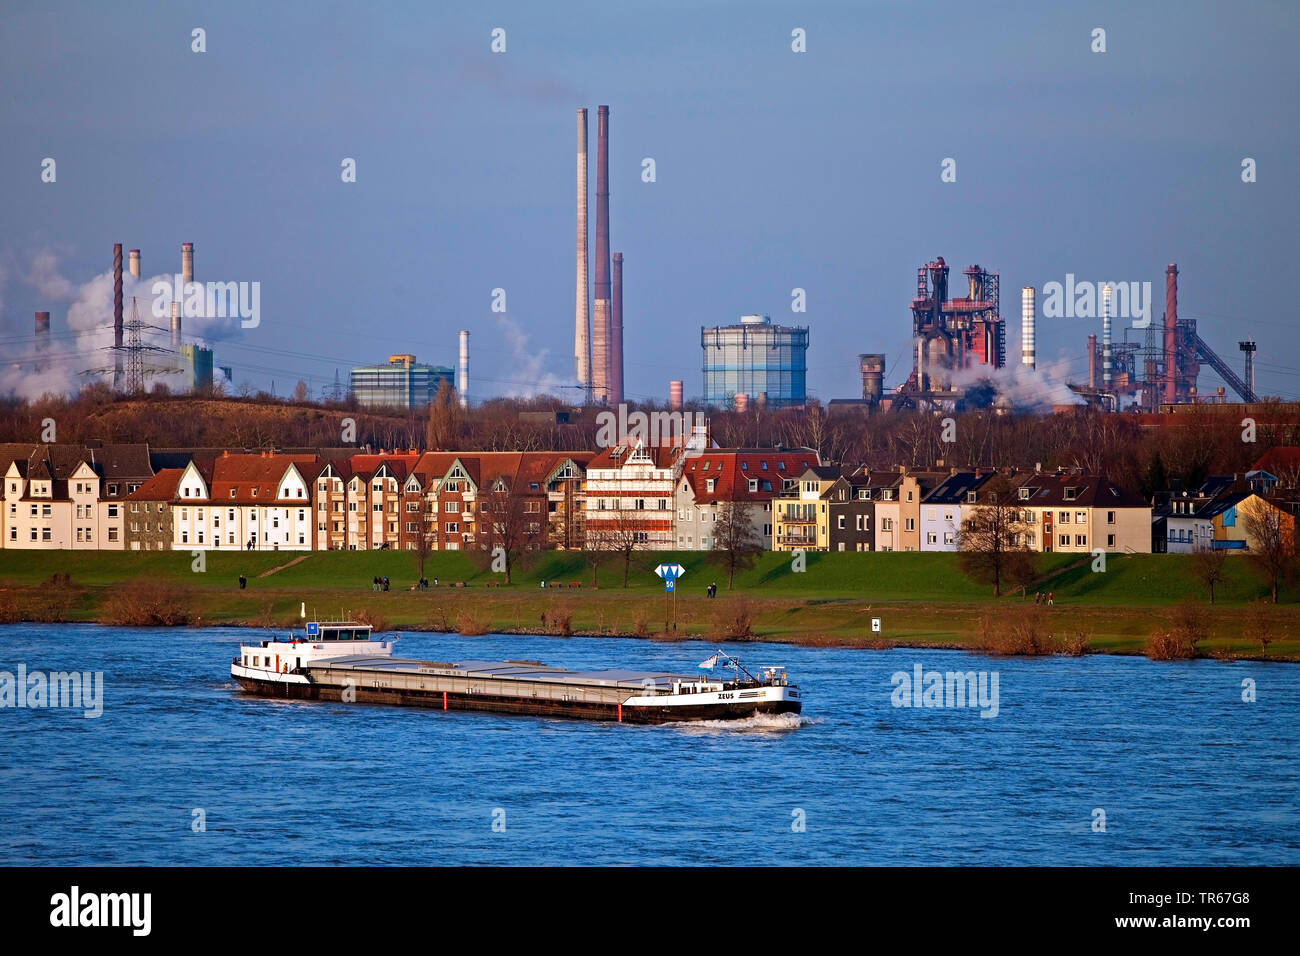 cargo ship on river Rhine, buildings and Thyssenkrupp industrial scenery in background, Germany, North Rhine-Westphalia, Ruhr Area, Duisburg Stock Photo